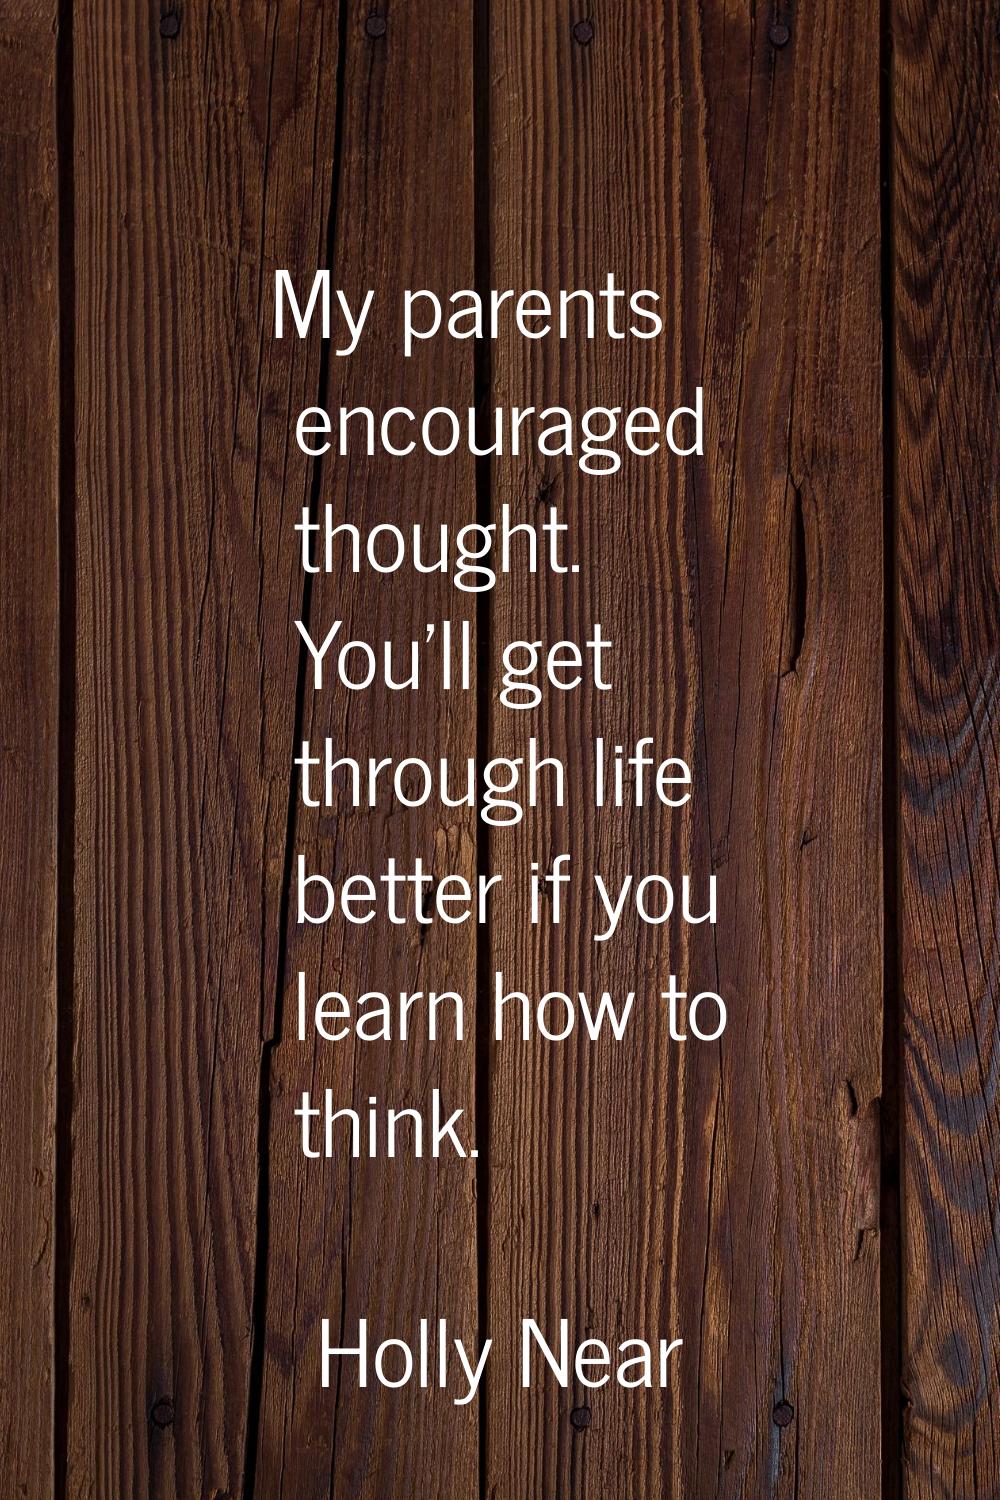 My parents encouraged thought. You'll get through life better if you learn how to think.